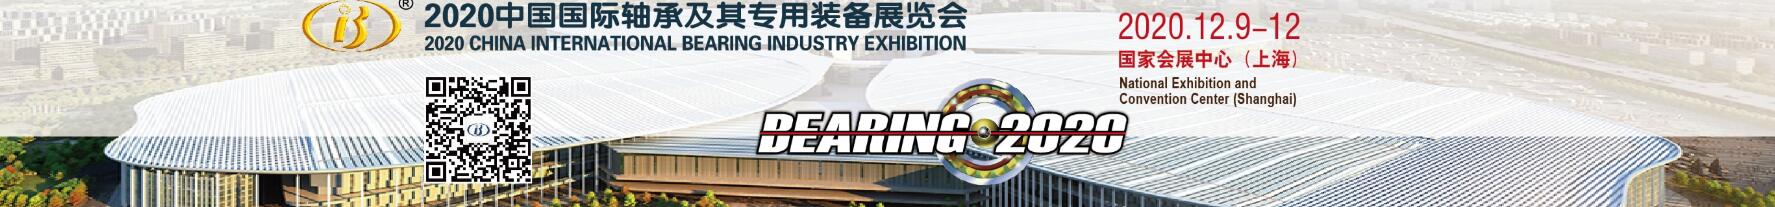 2020 CHINA INTERNATIONAL BEARING INDUSTRY EXHIBITION TO DEC.9-12, 2020